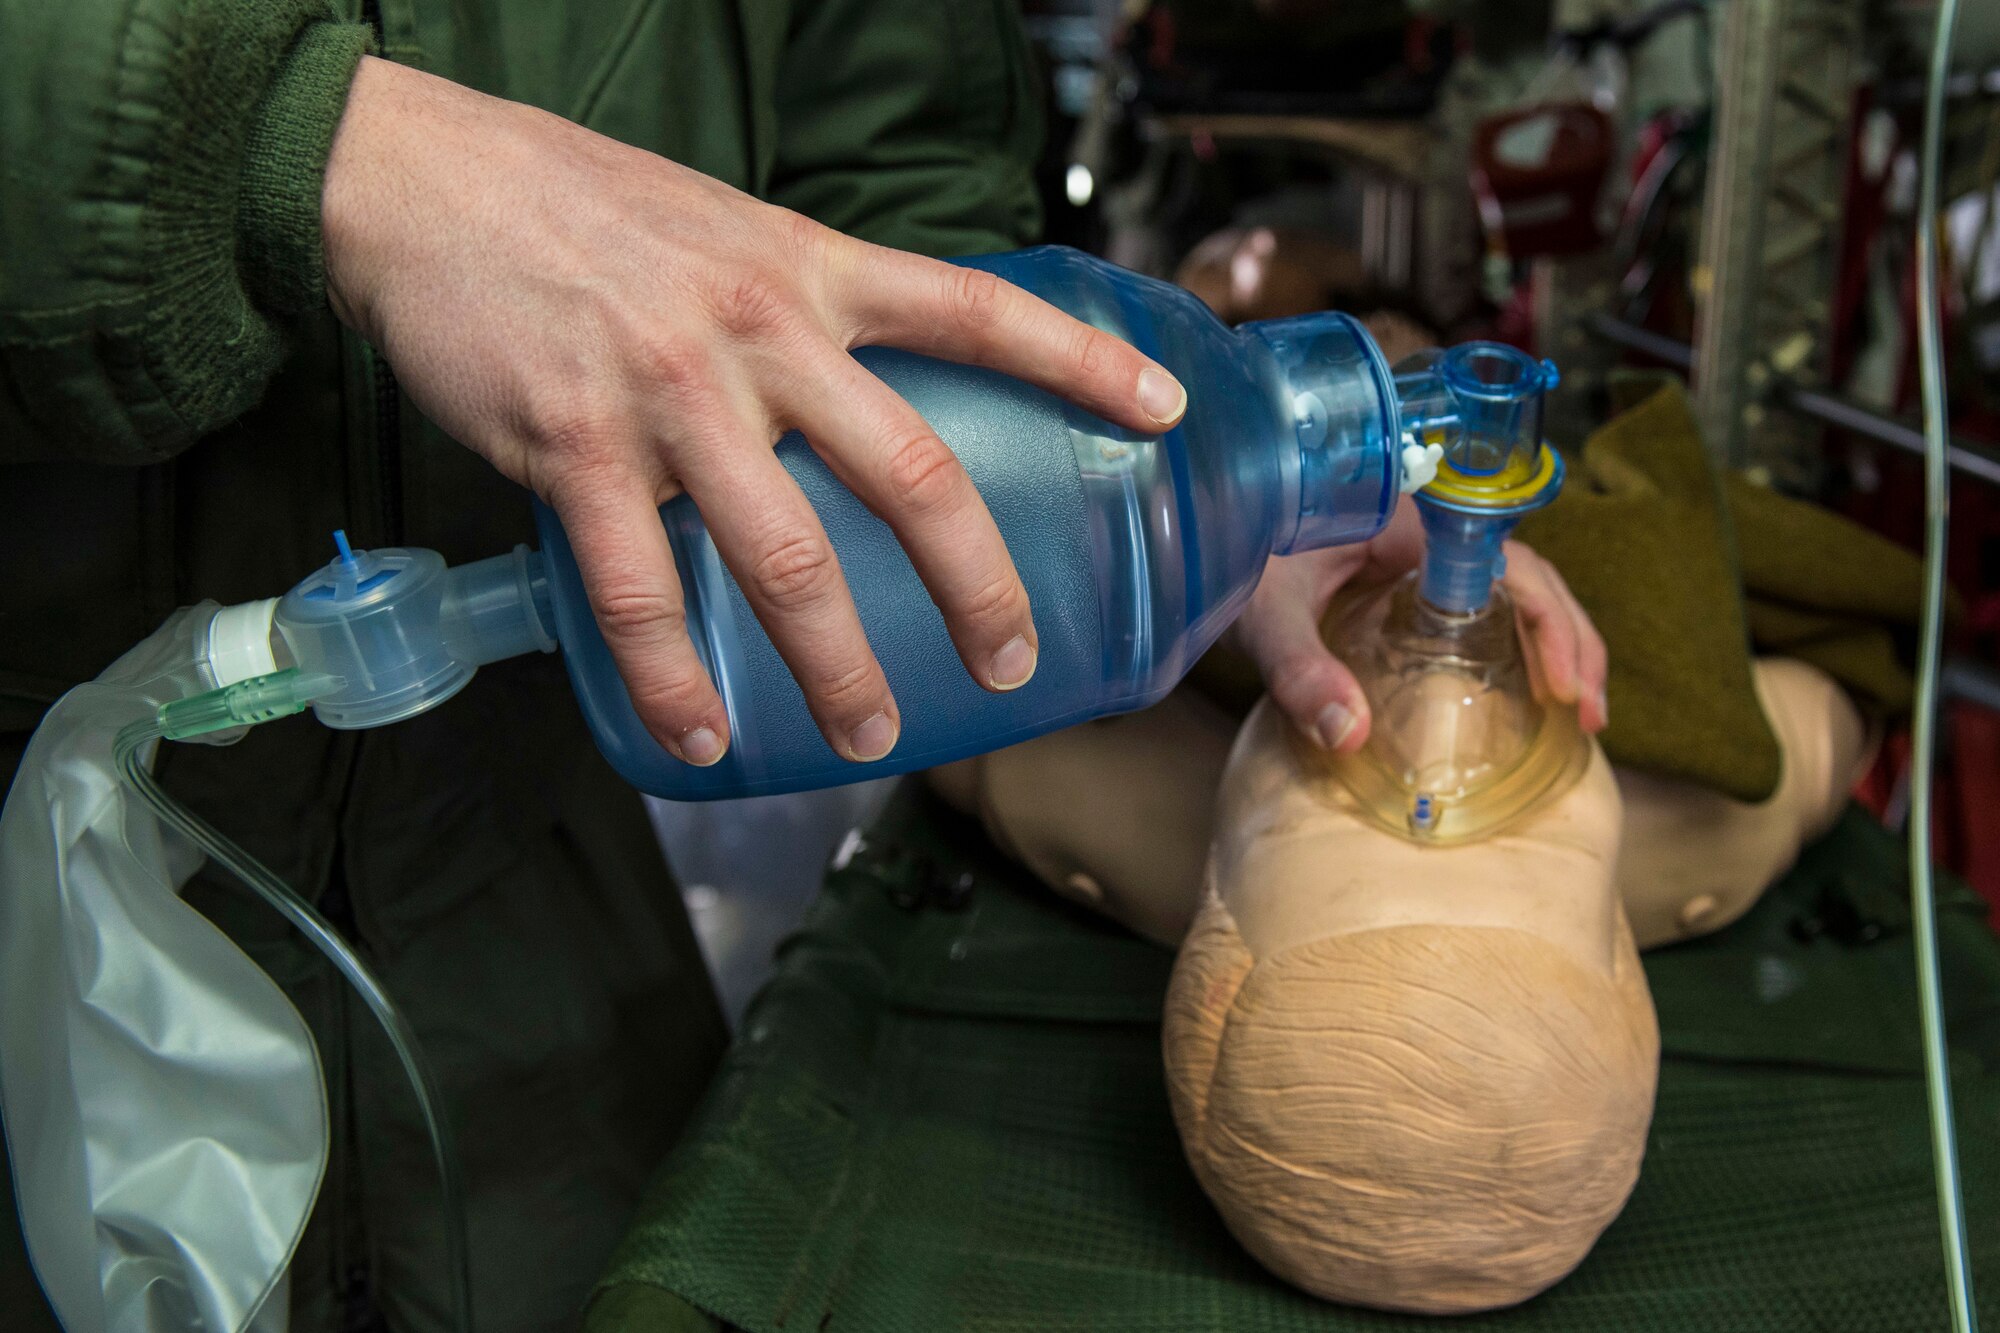 Airmen from the 375th Aeromedical Evacuation Squadron ensure proper functionality of medical equipment during an aeromedical evacuation training at Fairchild Air Force Base, Washington, March 1, 2018. During a mission, each piece of equipment is essential to providing critical care while transporting patients. (U.S. Air Force photo/Airman 1st Class Whitney Laine)